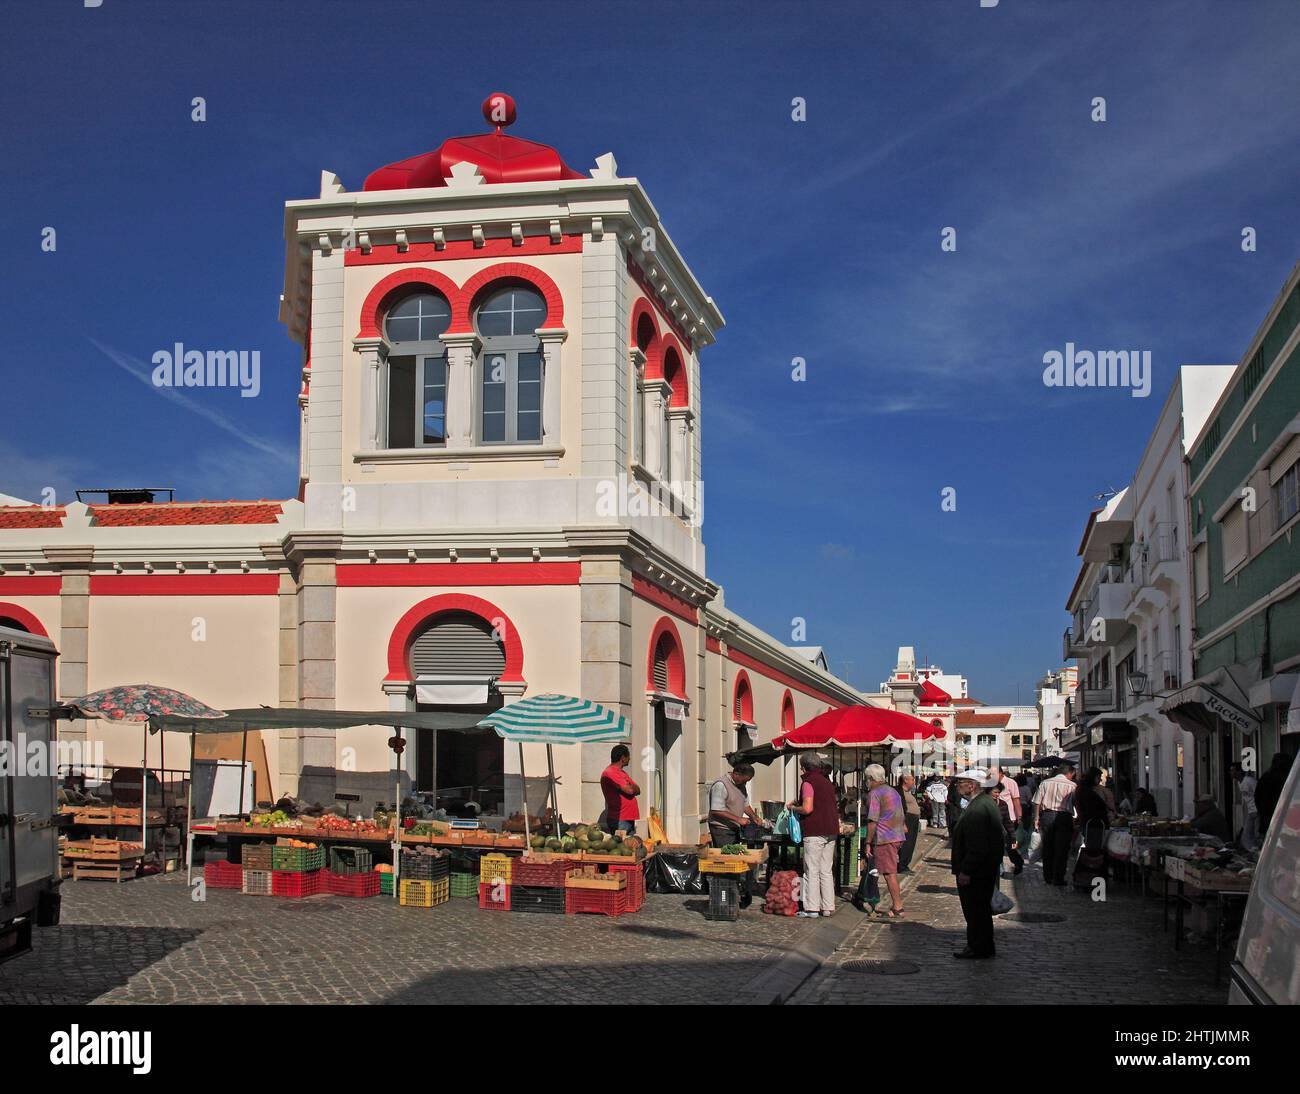 Neomaurische Markthalle in Loule, Algarve, Portugal Stock Photo